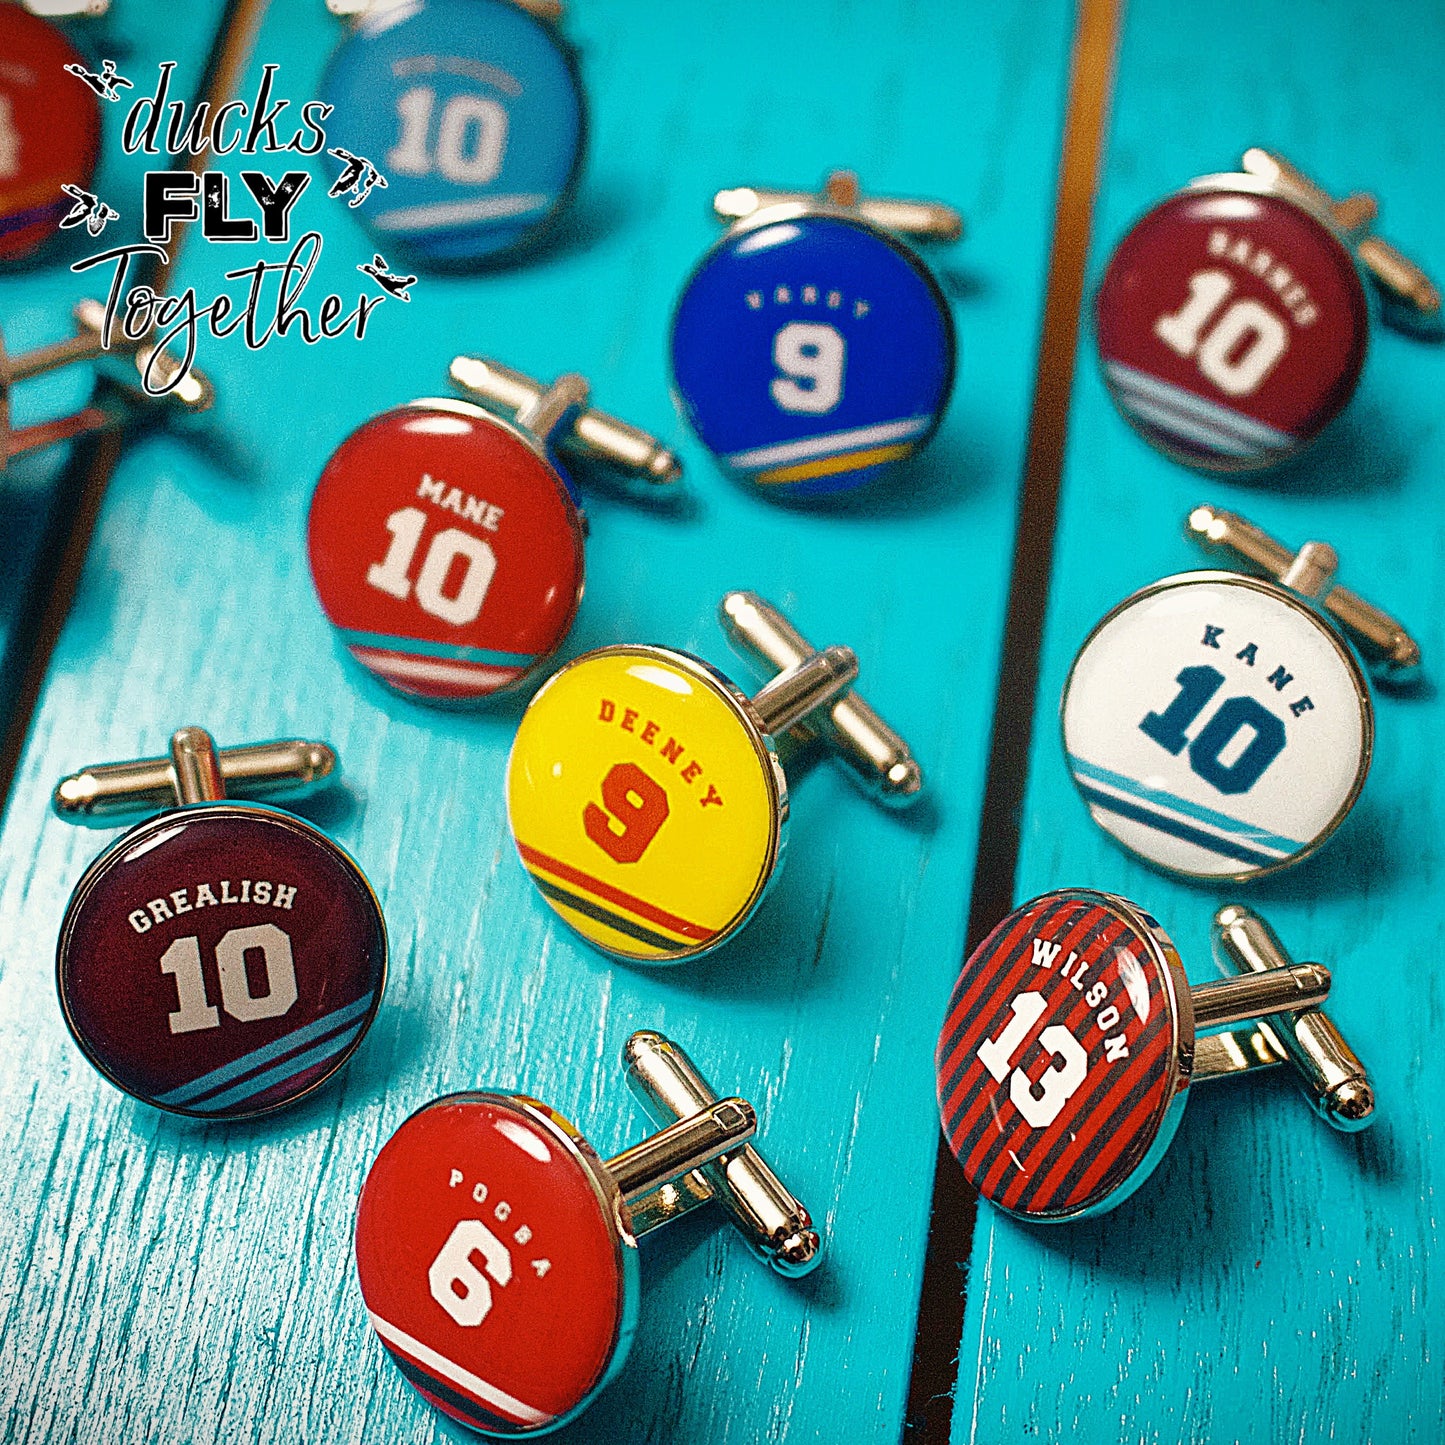 Gloucester Rugby Cufflinks. Personalised gift for rugby fan. Christmas present for men. Premiership Rugby. Sports jersey. Your name.